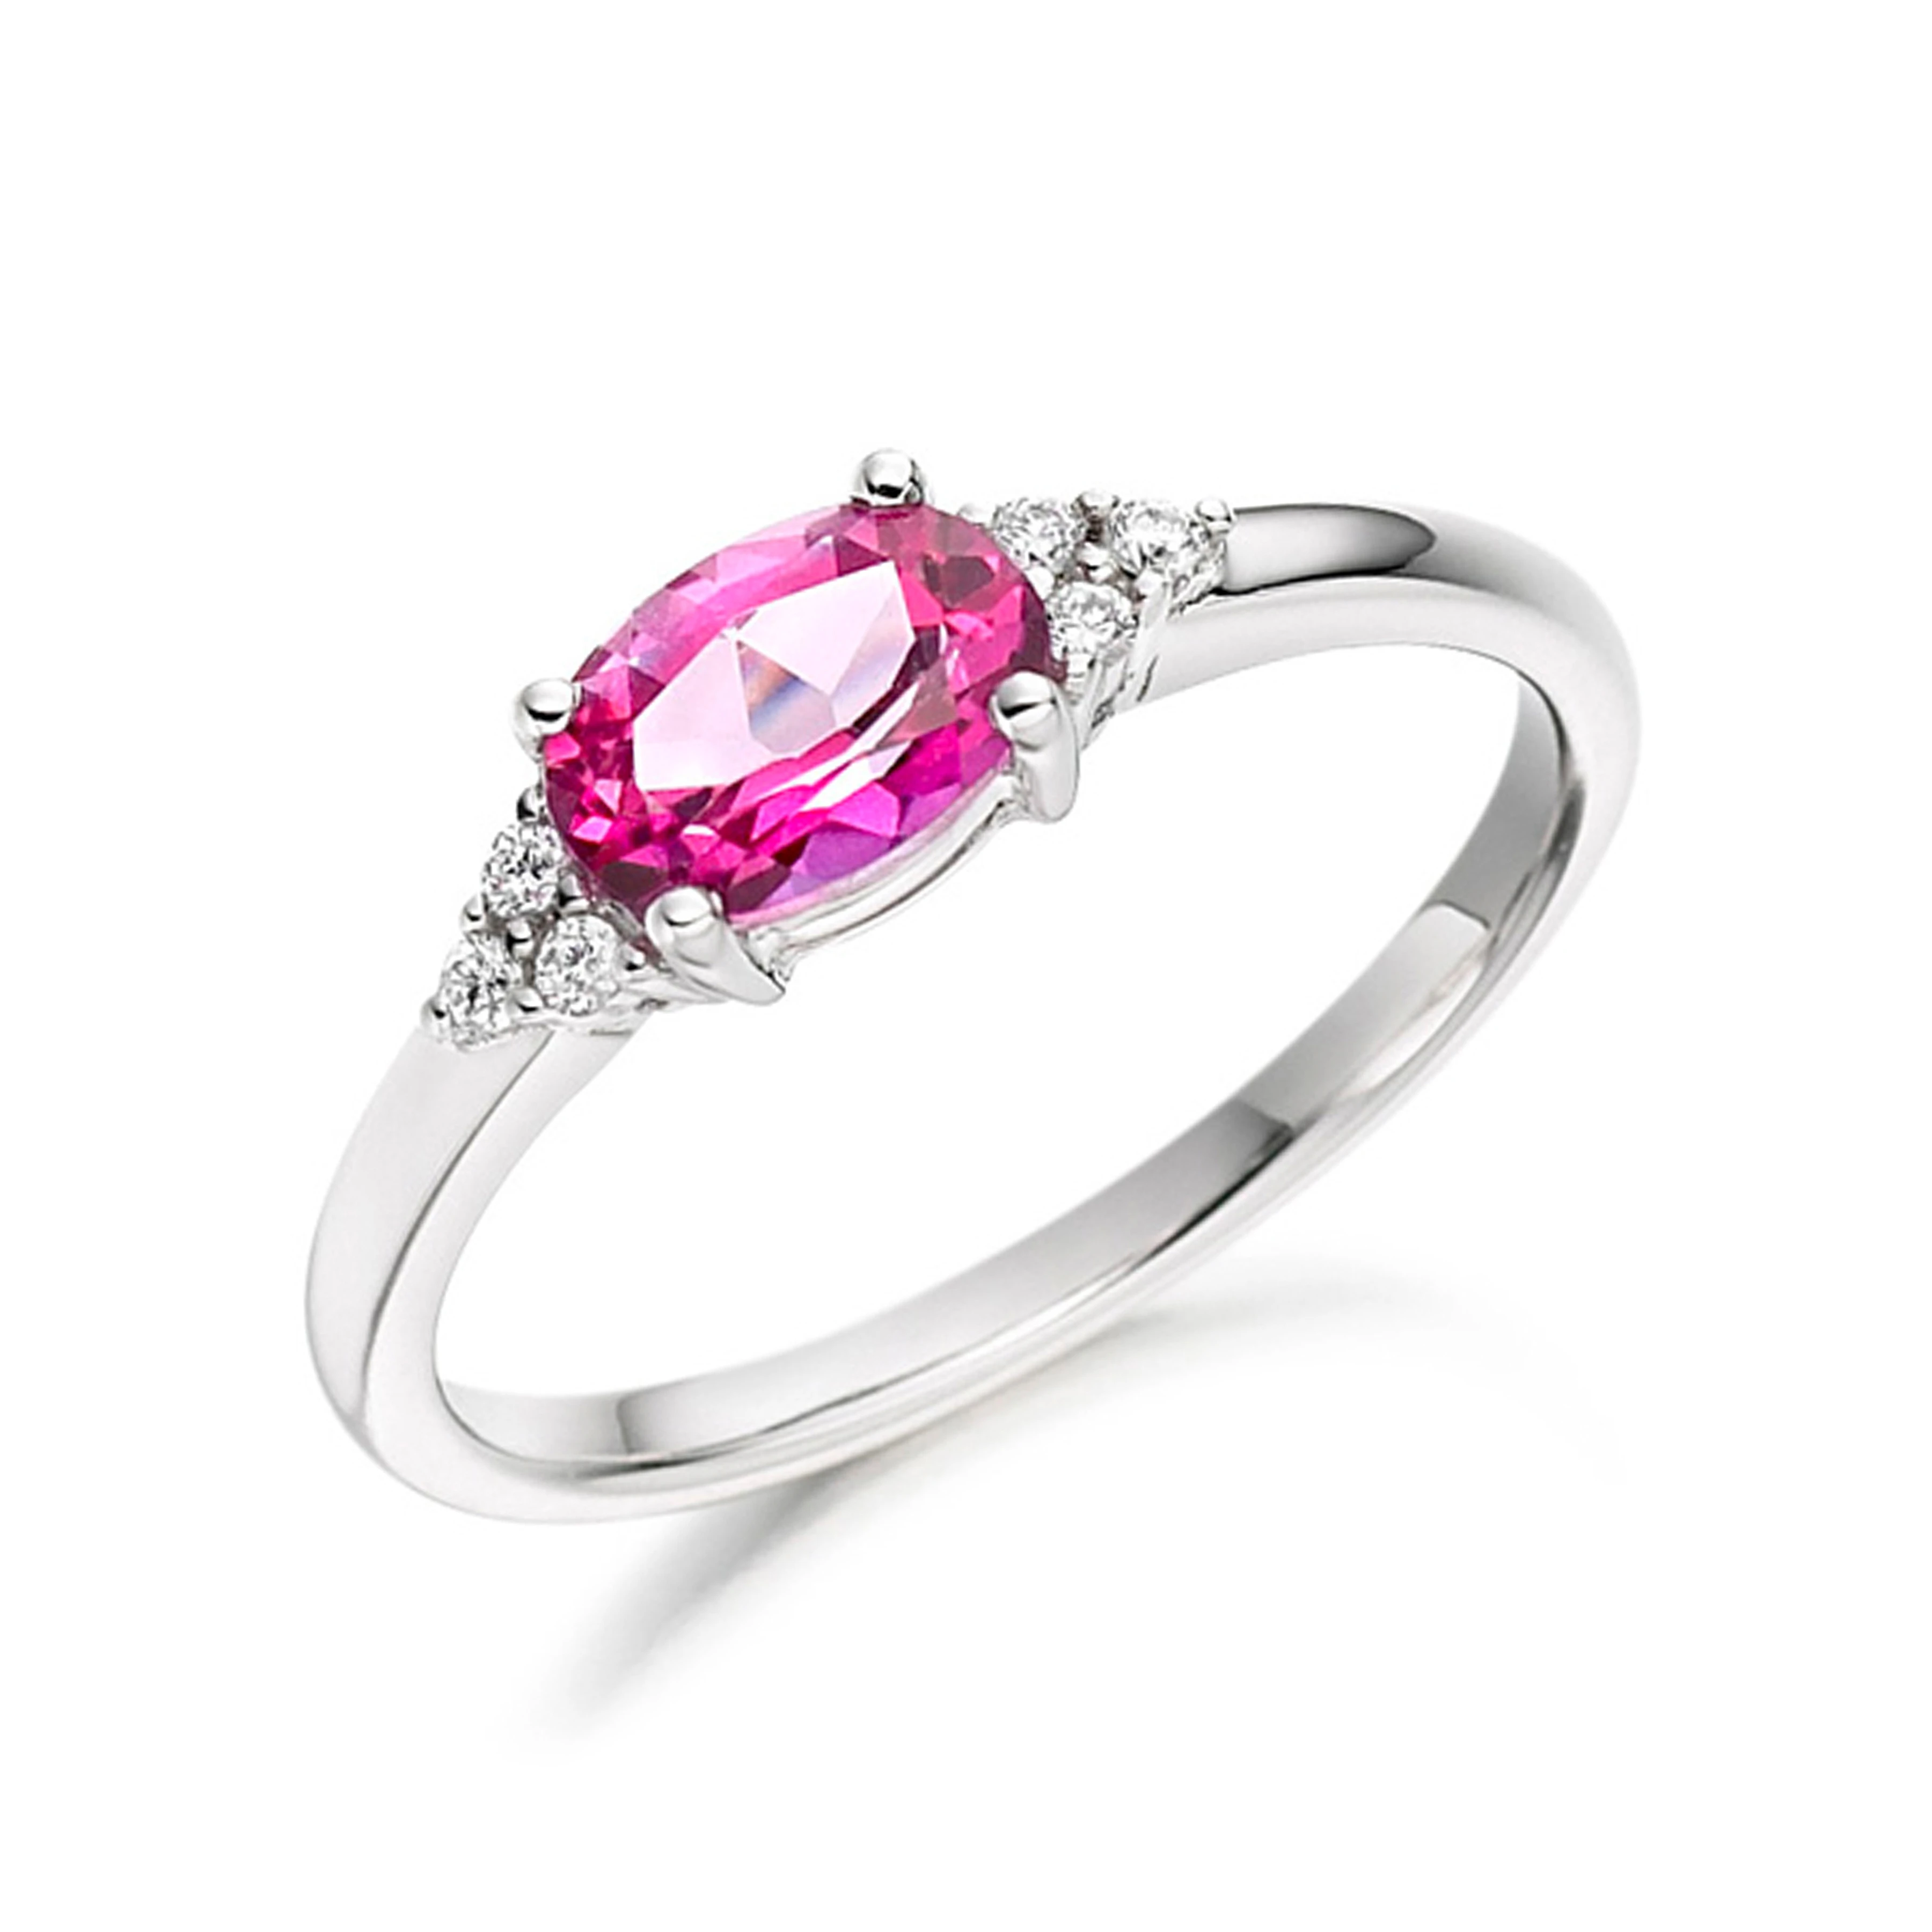 7X5mm Oval Pink Topaz Seven Stone Diamond And Gemstone Ring